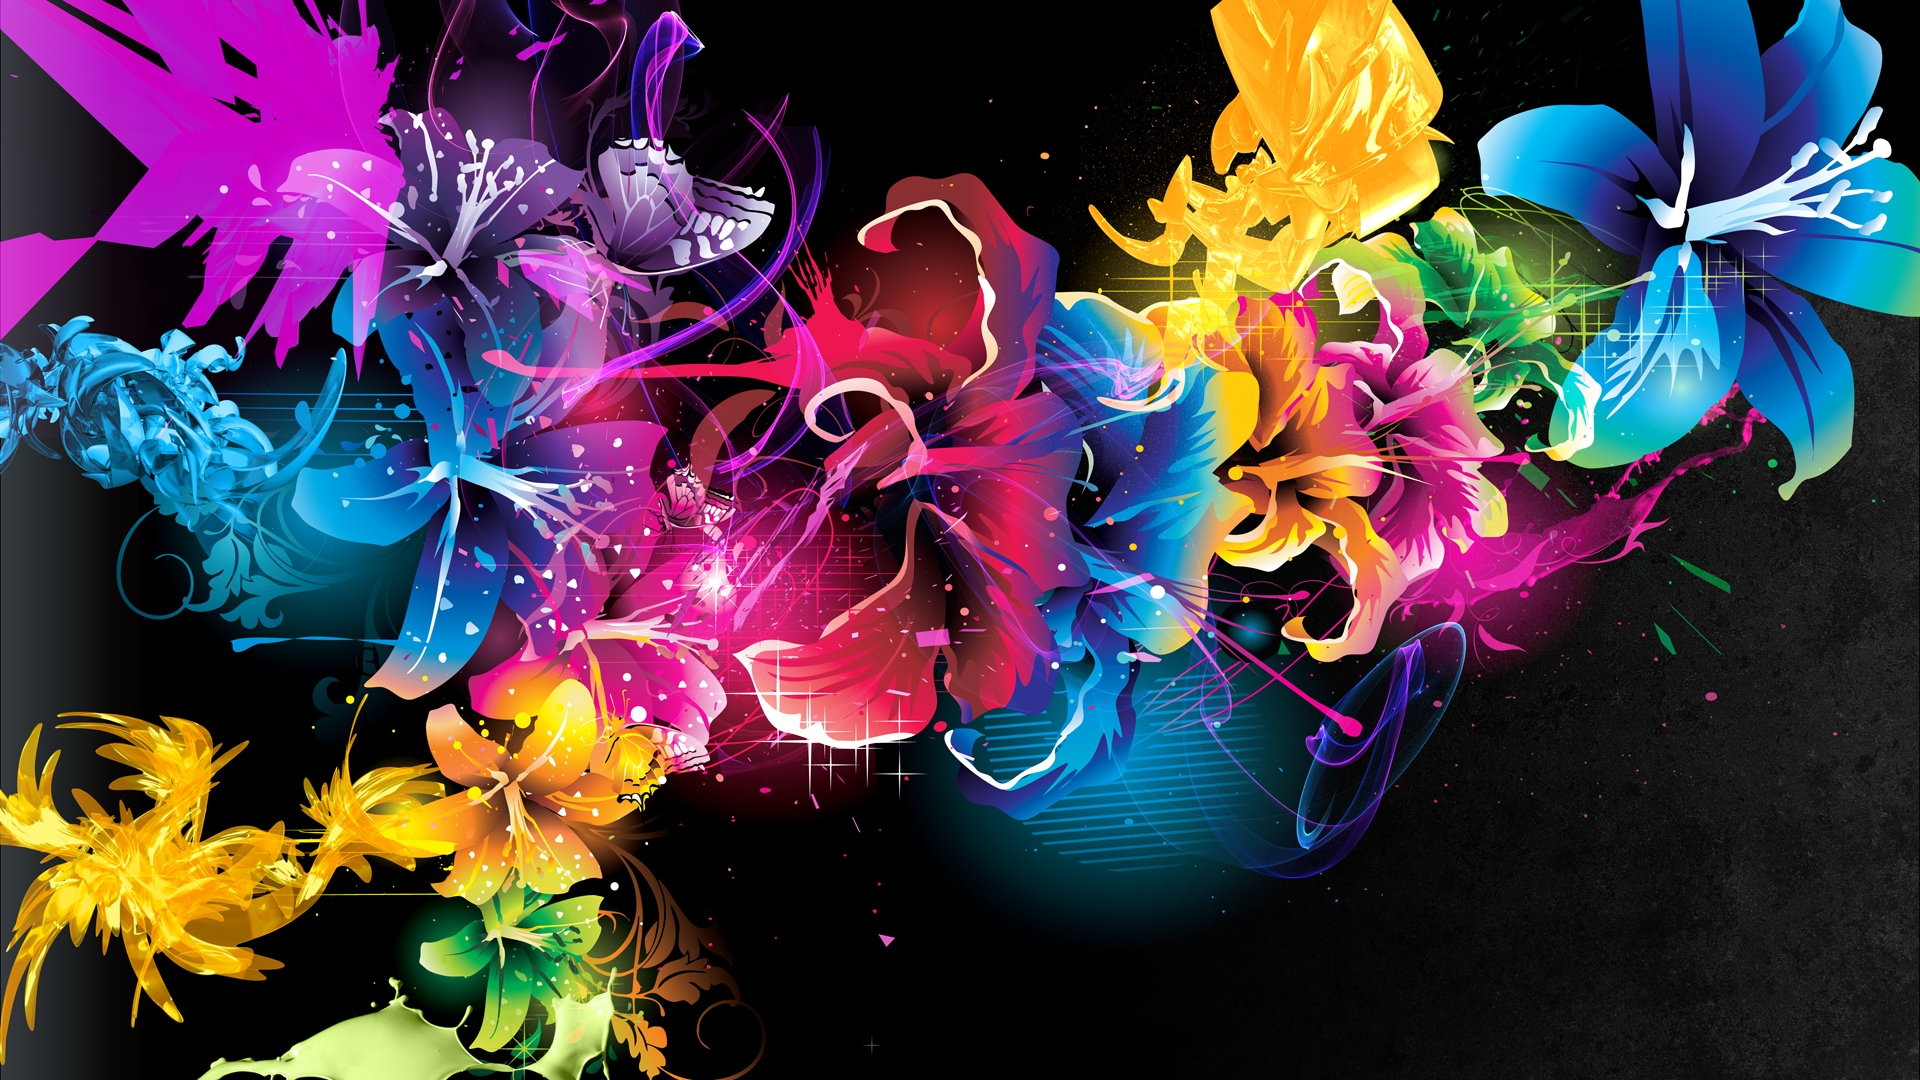 Beautiful Fractal Flowers for 1920 x 1080 HDTV 1080p resolution